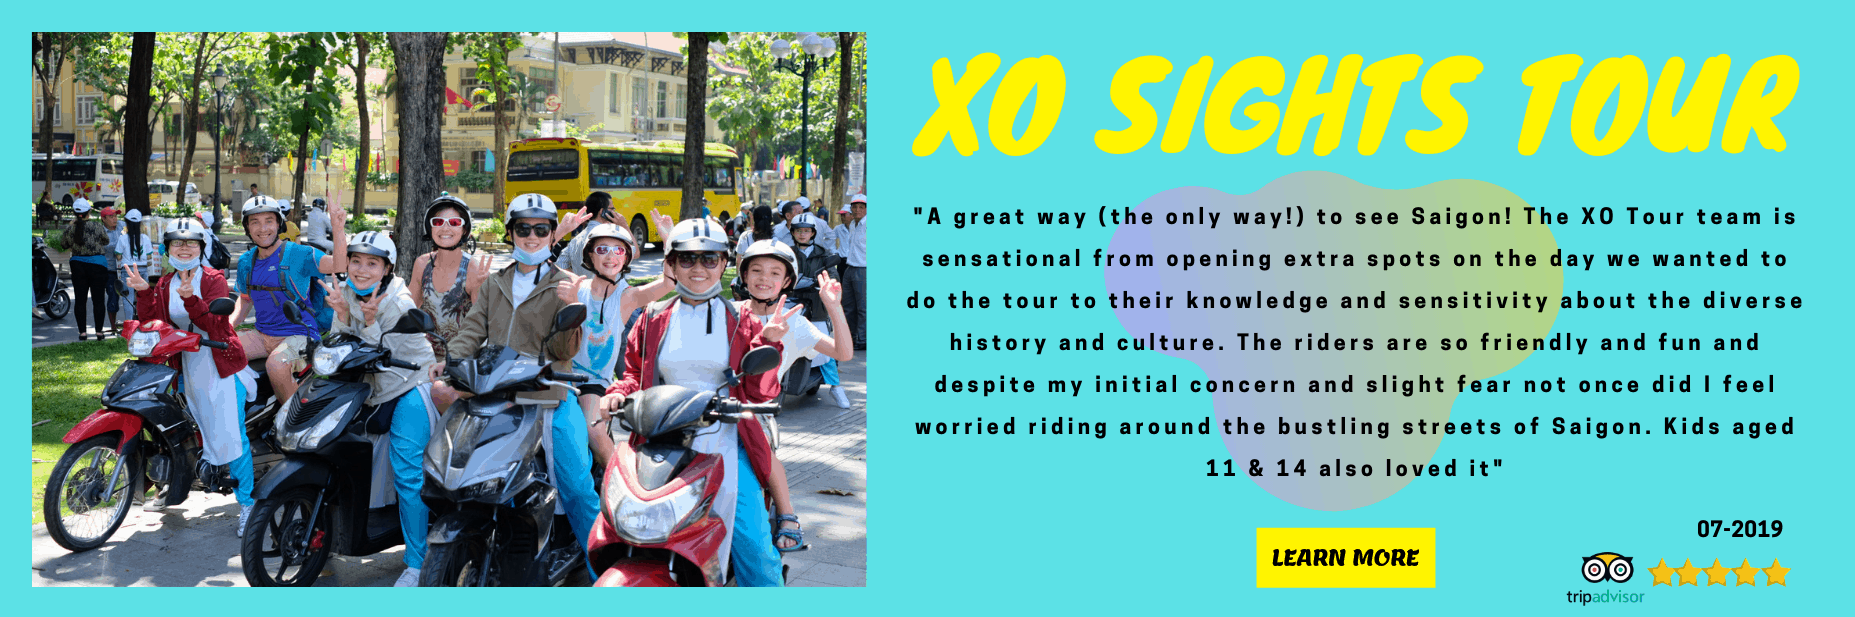 family of 4 on XO scooter tour